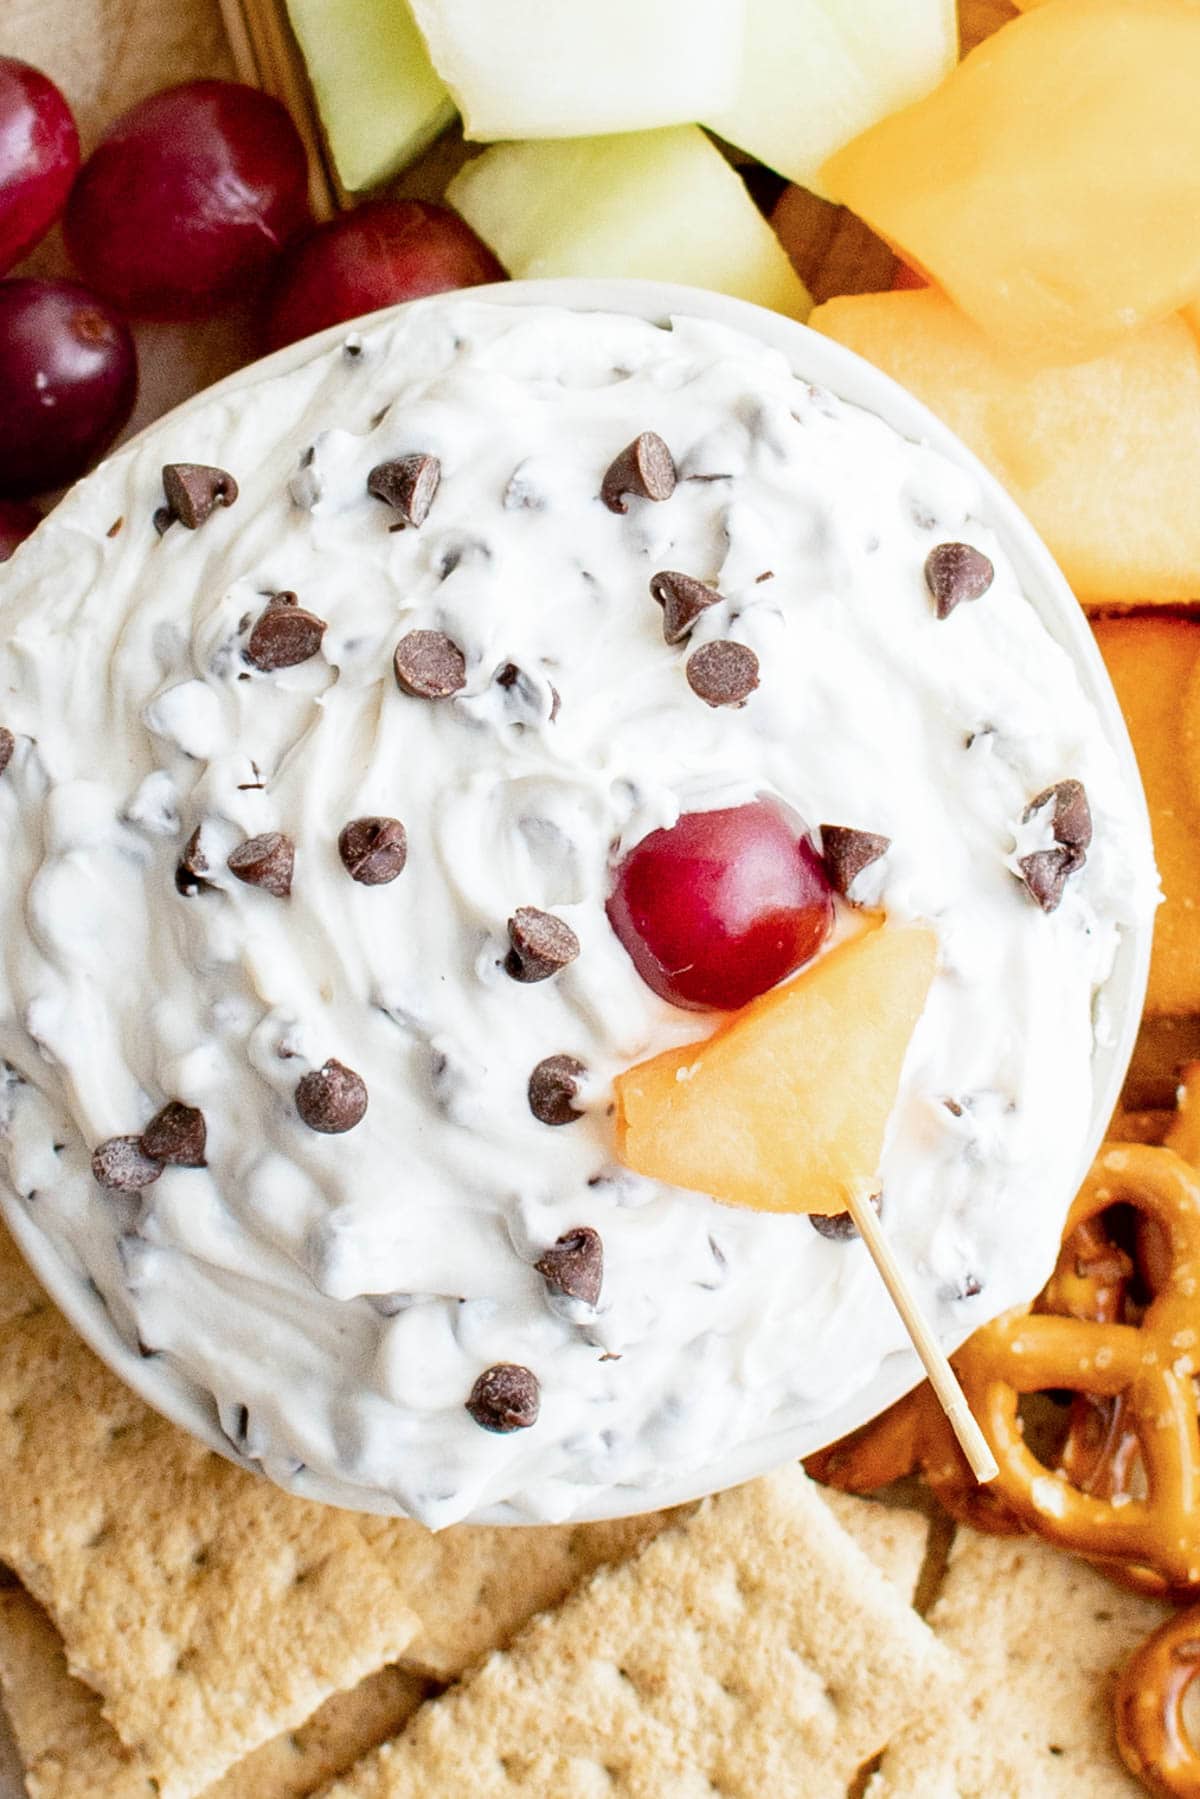 Chocolate chip on a white dip with a cherry and piece of pineapple.